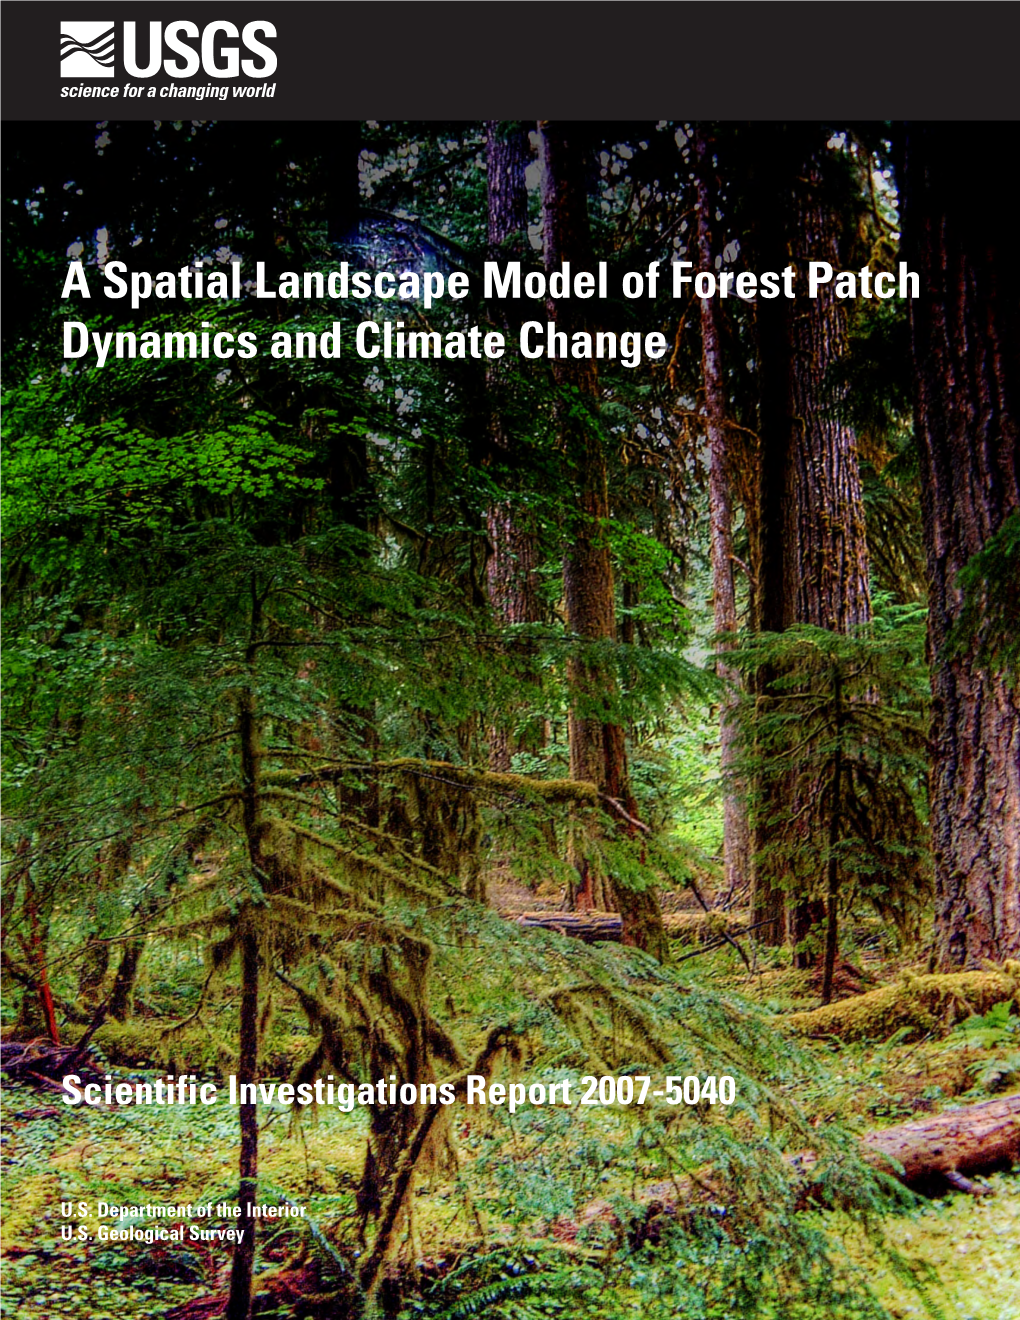 A Spatial Landscape Model of Forest Patch Dynamics and Climate Change